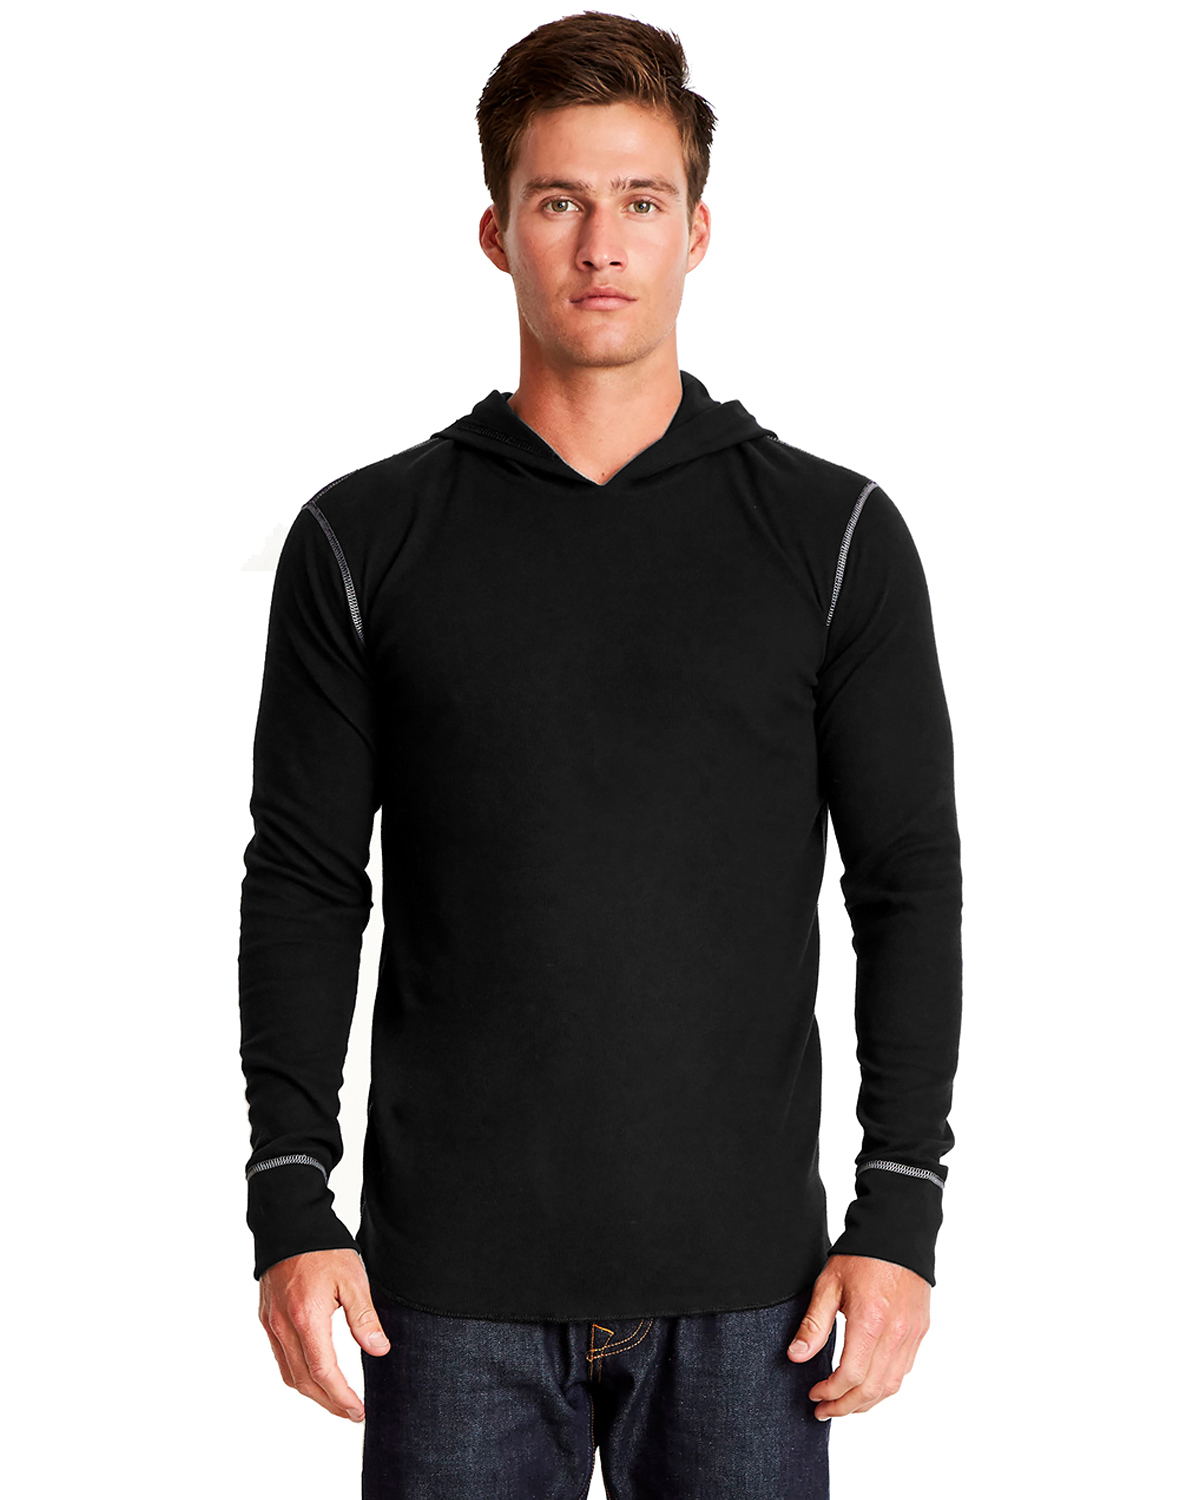 Next Level 8221 - Adult Thermal Hoody